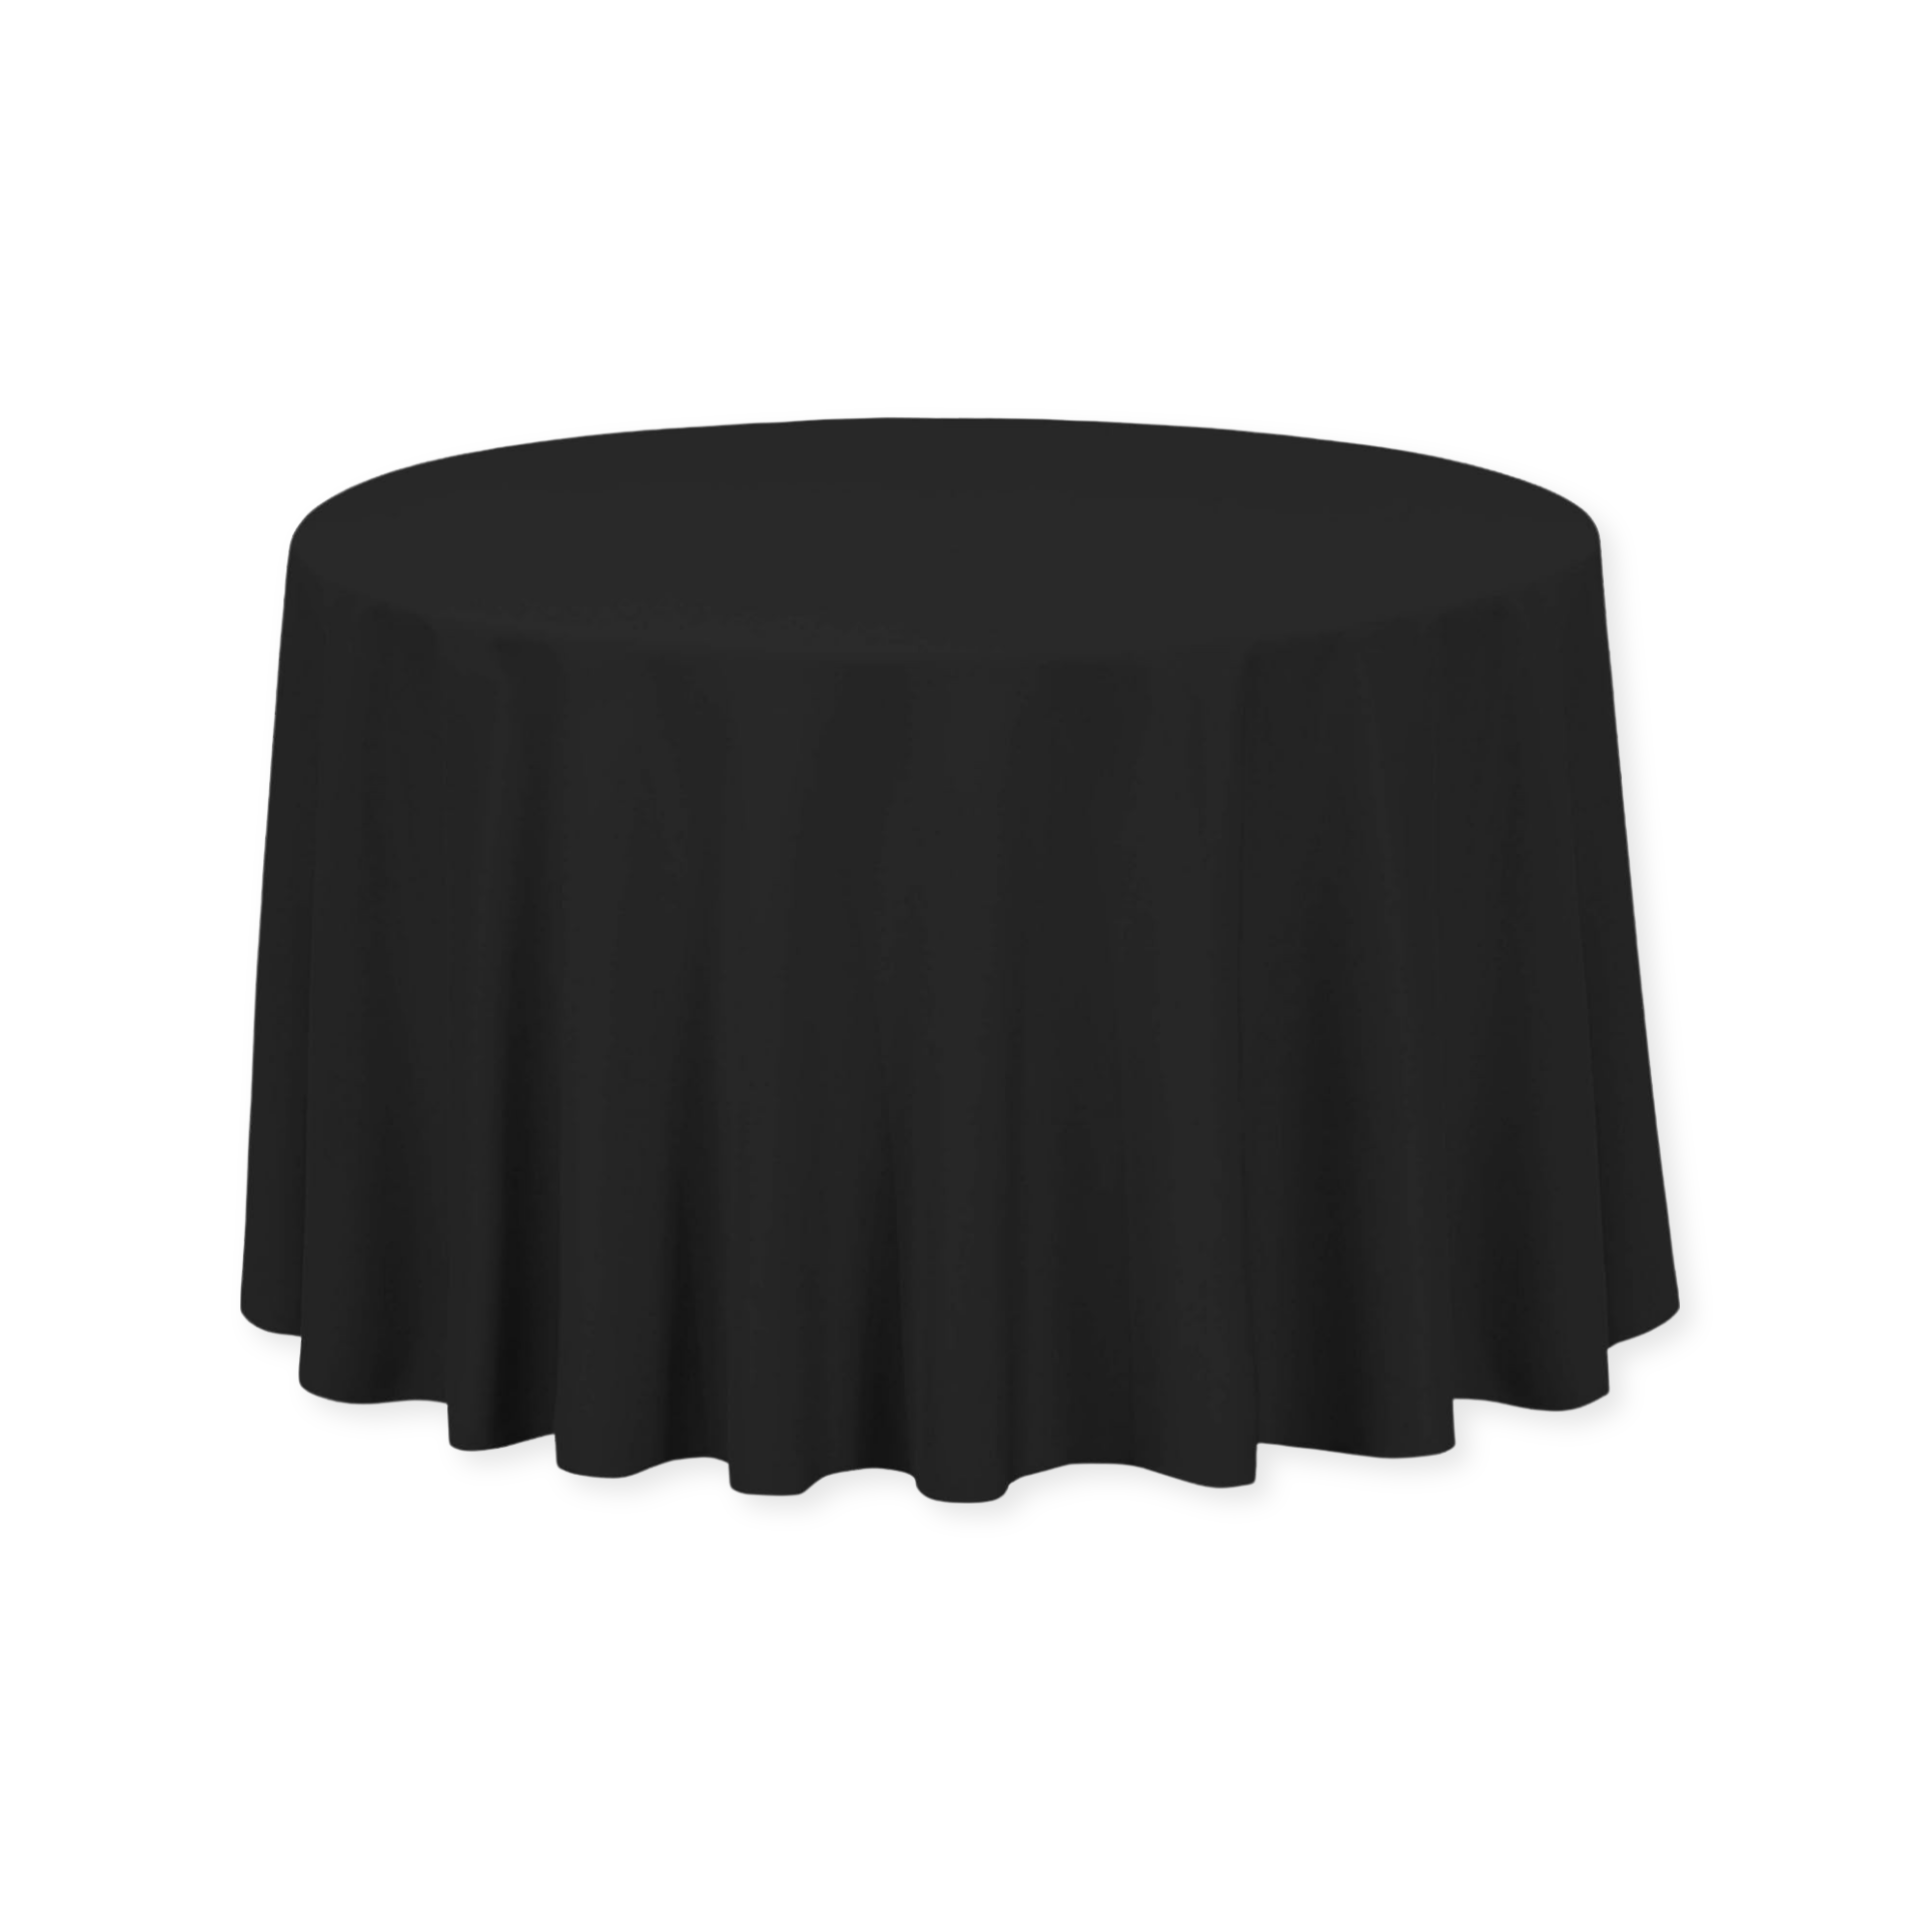 Tablecloth polyester round  Black commercial grade wedding party event rental panama city beach